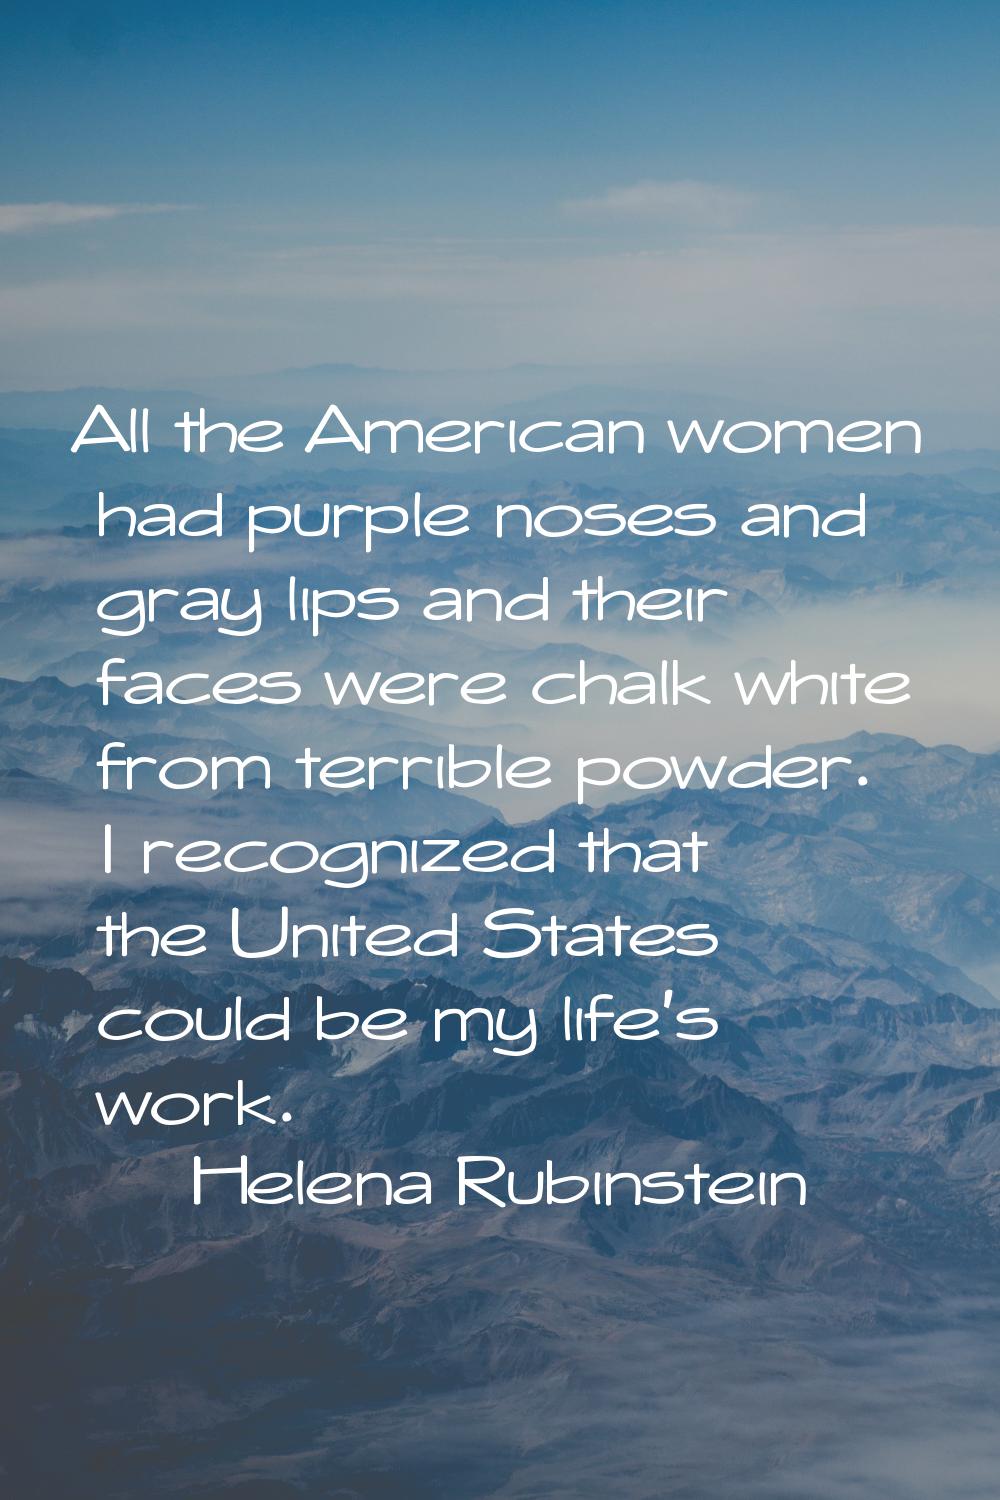 All the American women had purple noses and gray lips and their faces were chalk white from terribl